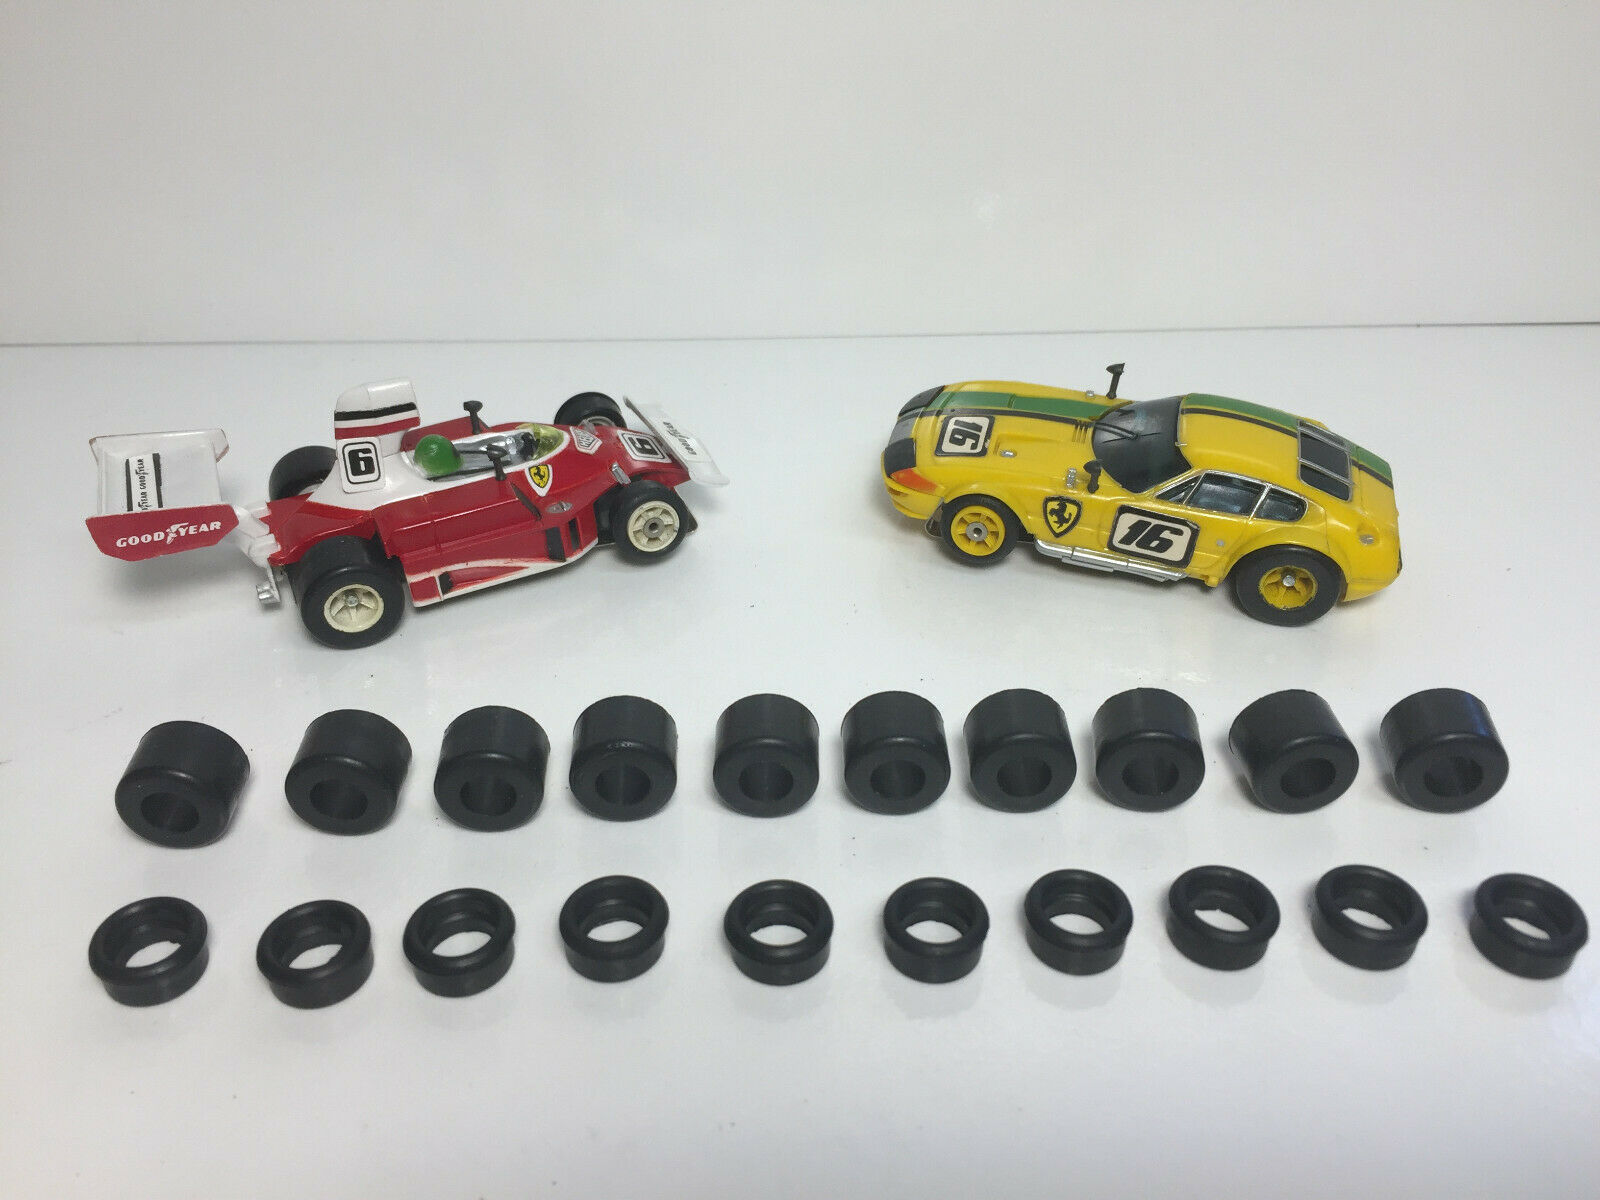 Afx~ G+ ~new~(10) Wide Front & (10) Rear Tires For G+ Chassis Aurora Super Grip!